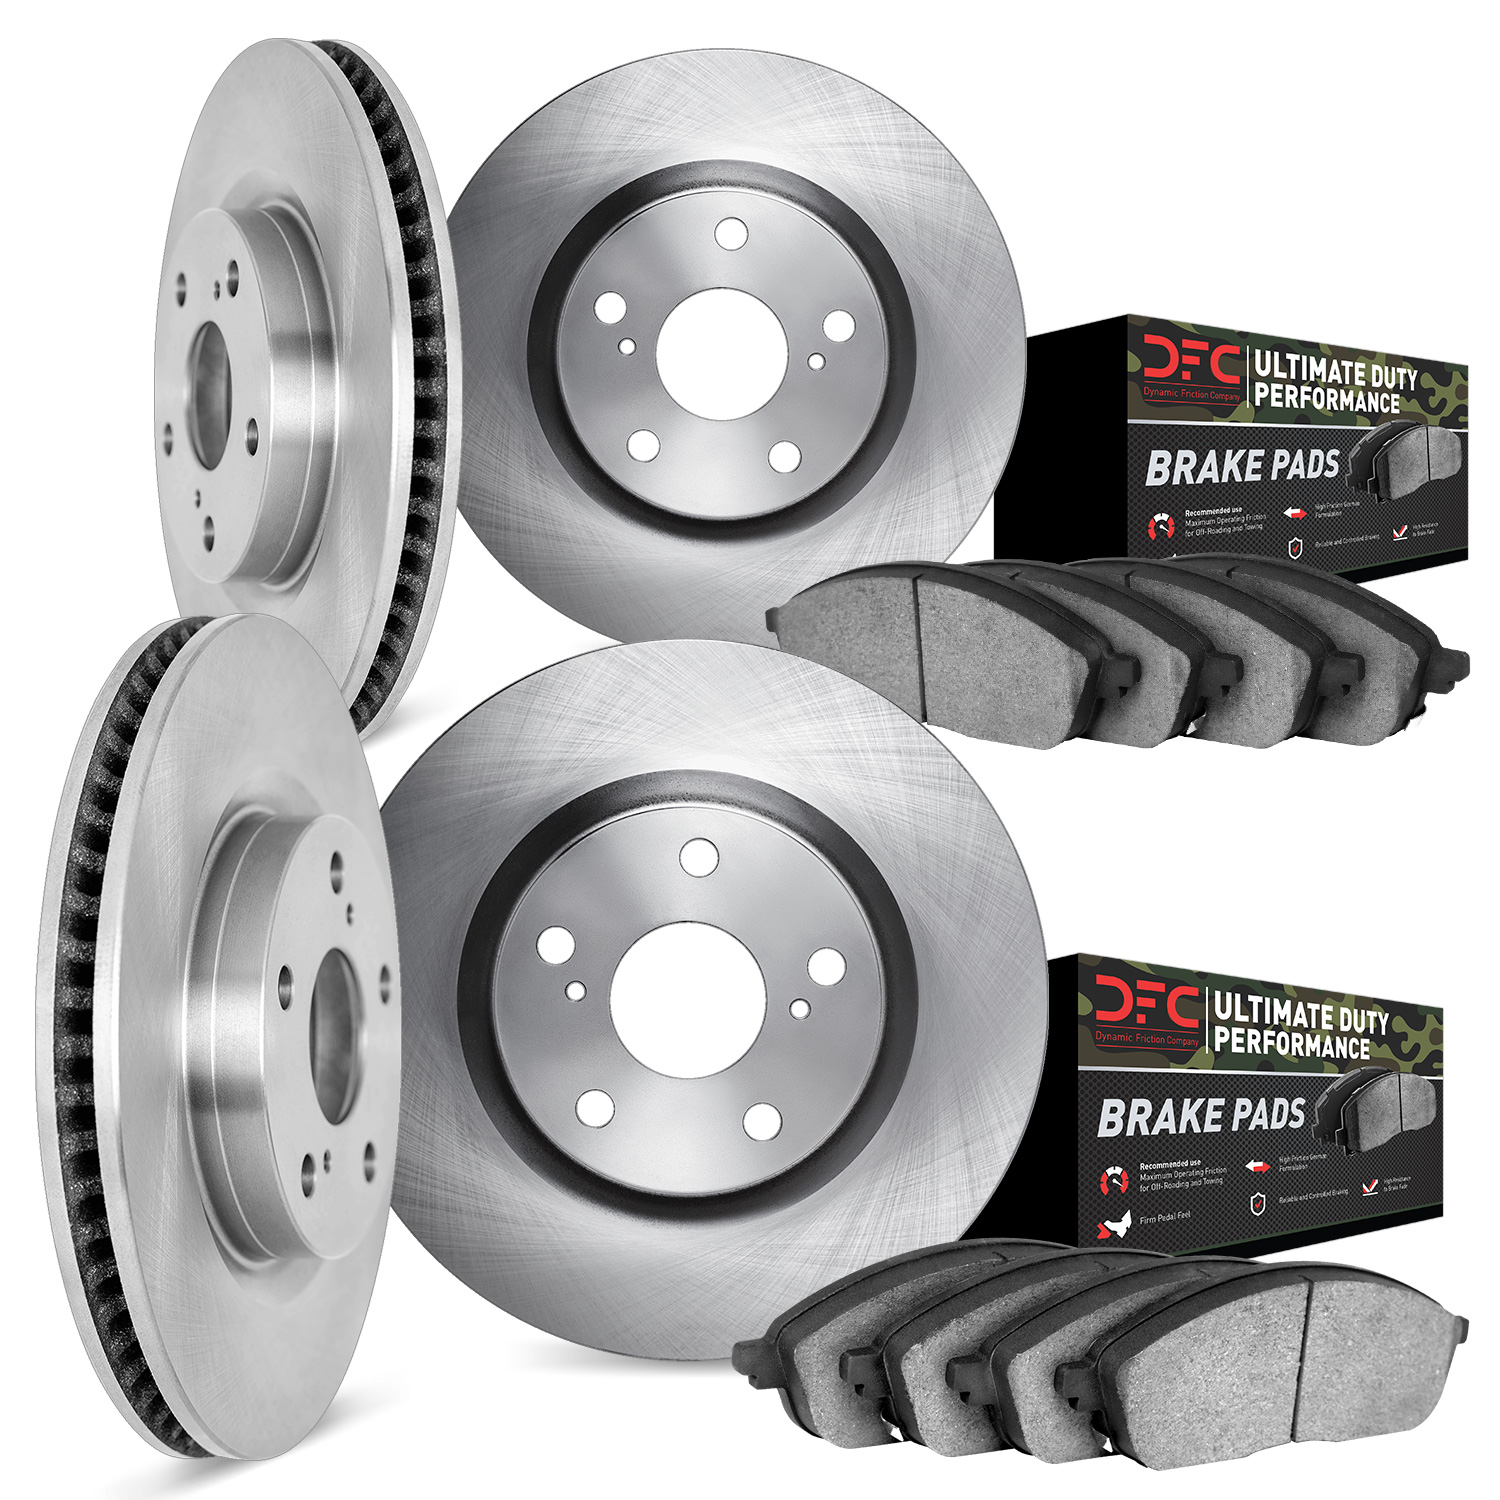 6404-42006 Brake Rotors with Ultimate-Duty Brake Pads, 2006-2010 Mopar, Position: Front and Rear